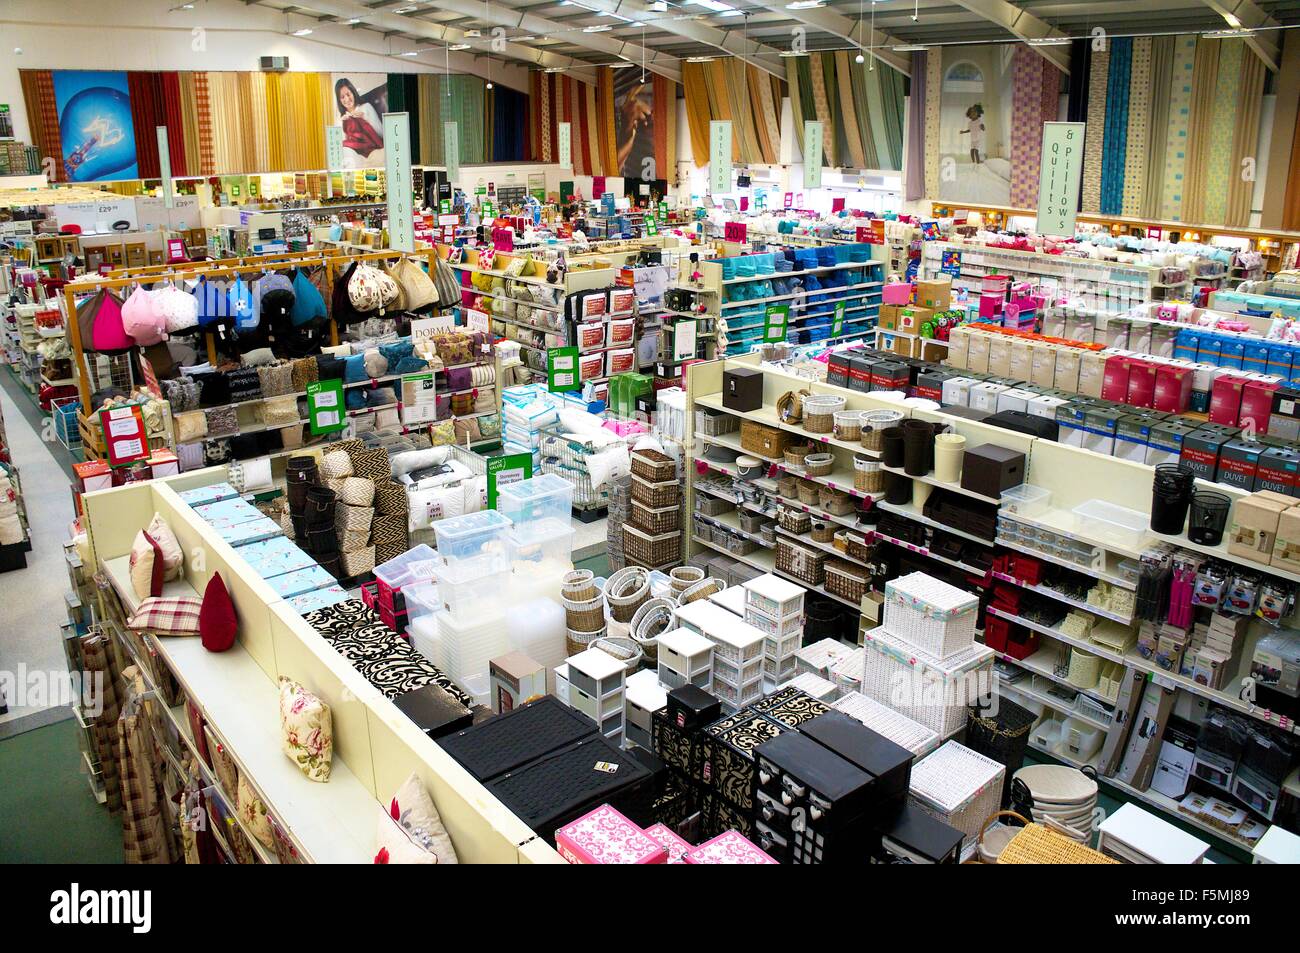 Superstore furniture and soft furnishings aisle. Stock Photo